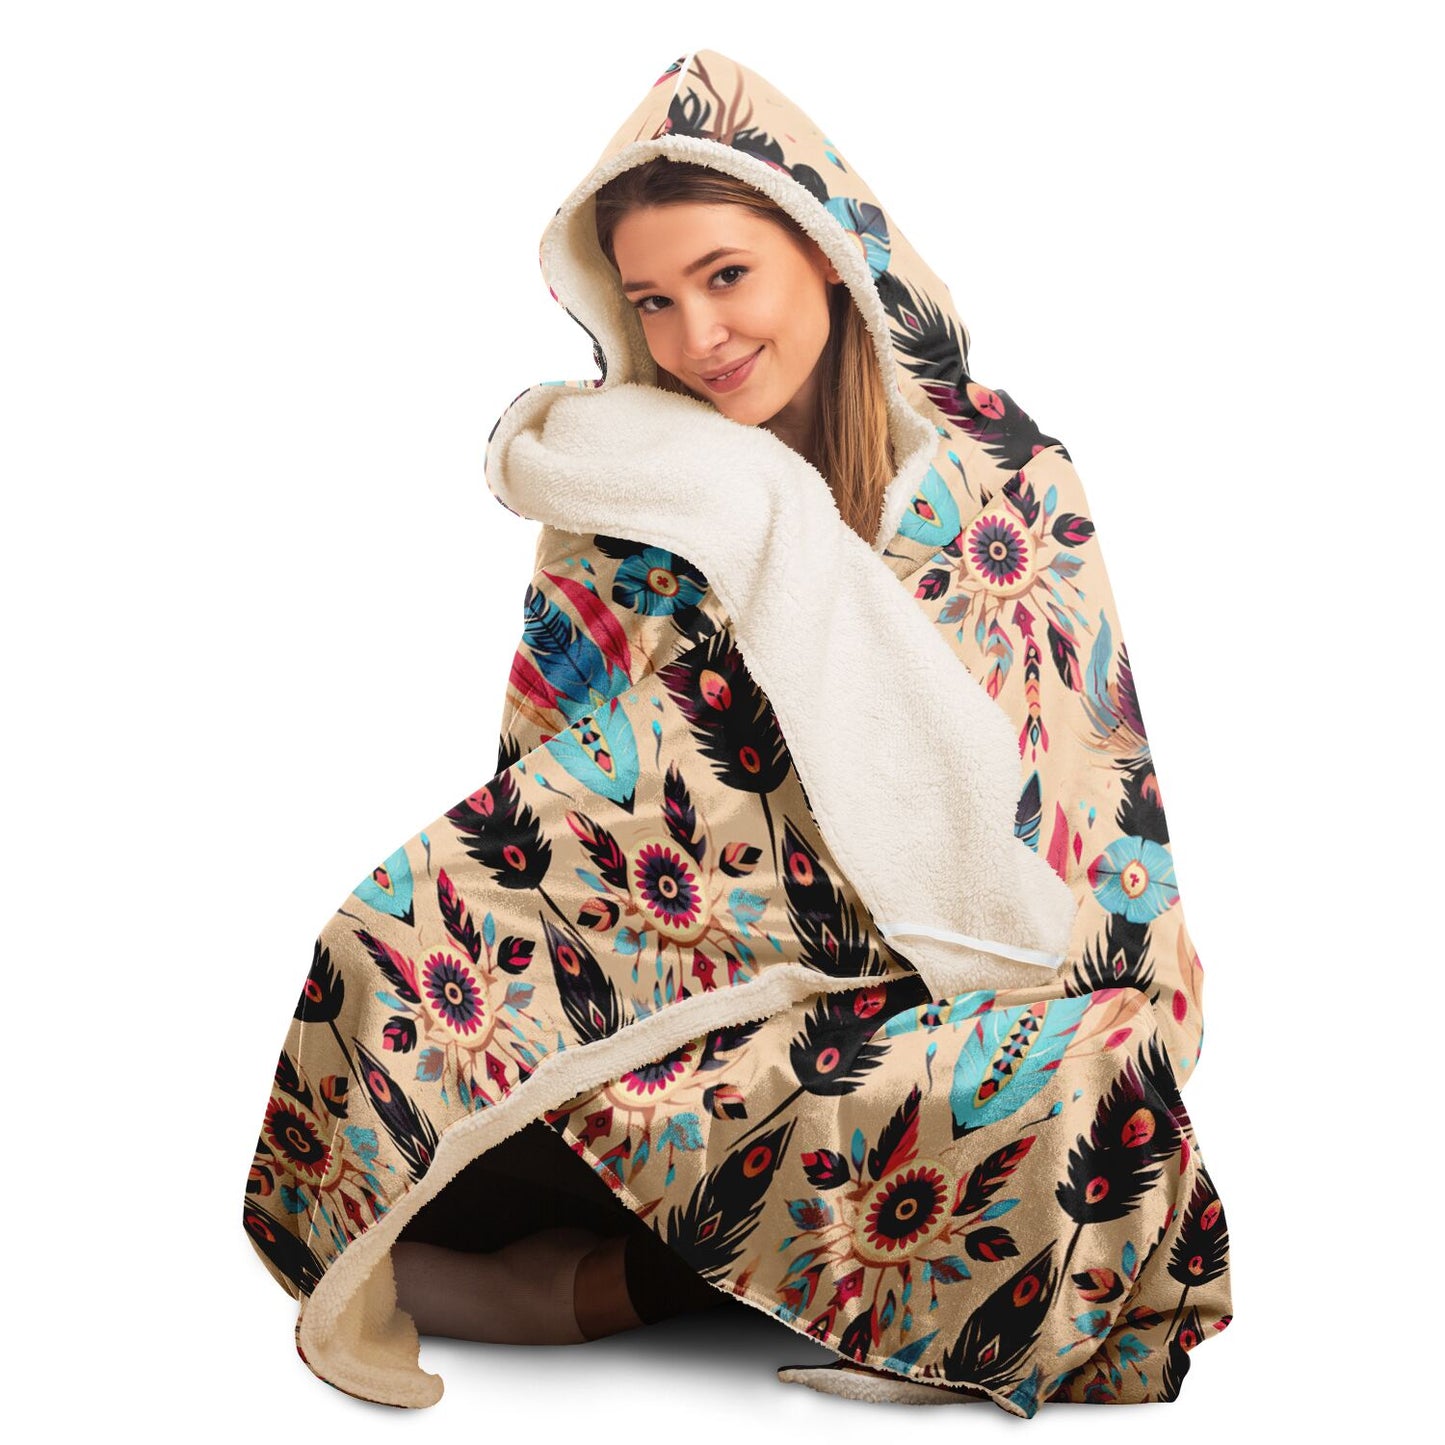 Native Indian Headdress Feathers Design Hooded Blanket - All Over Print - Boho Feathers